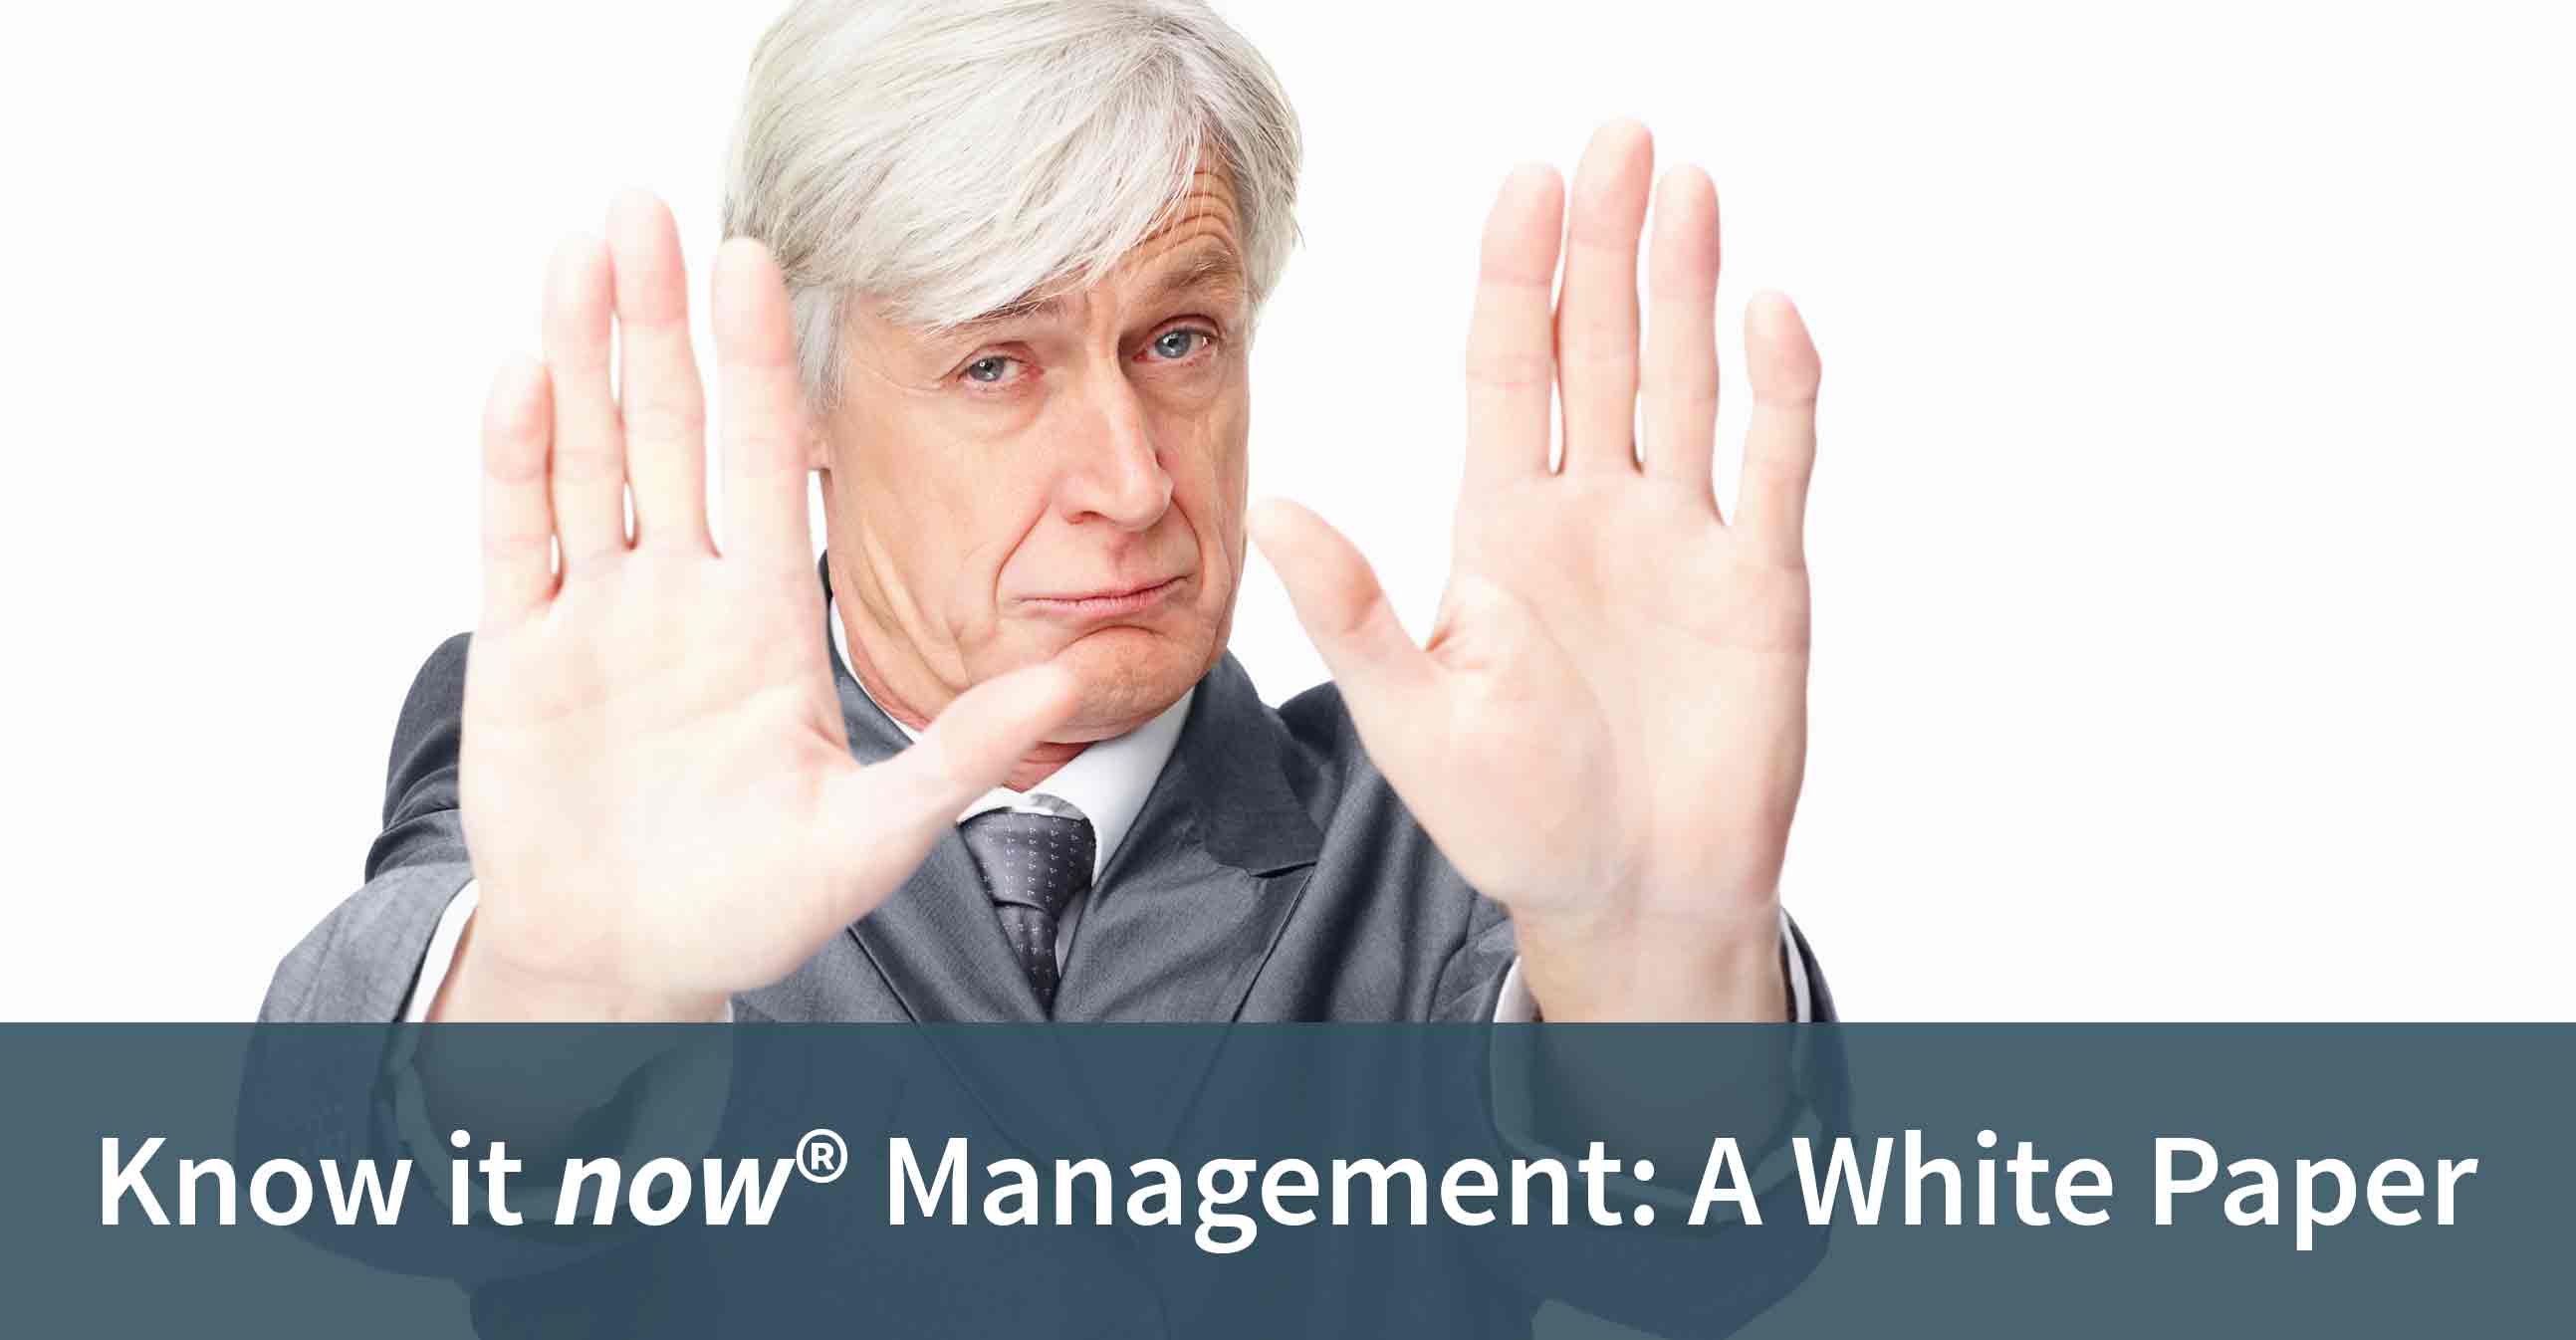 Know it now Management: A White Paper